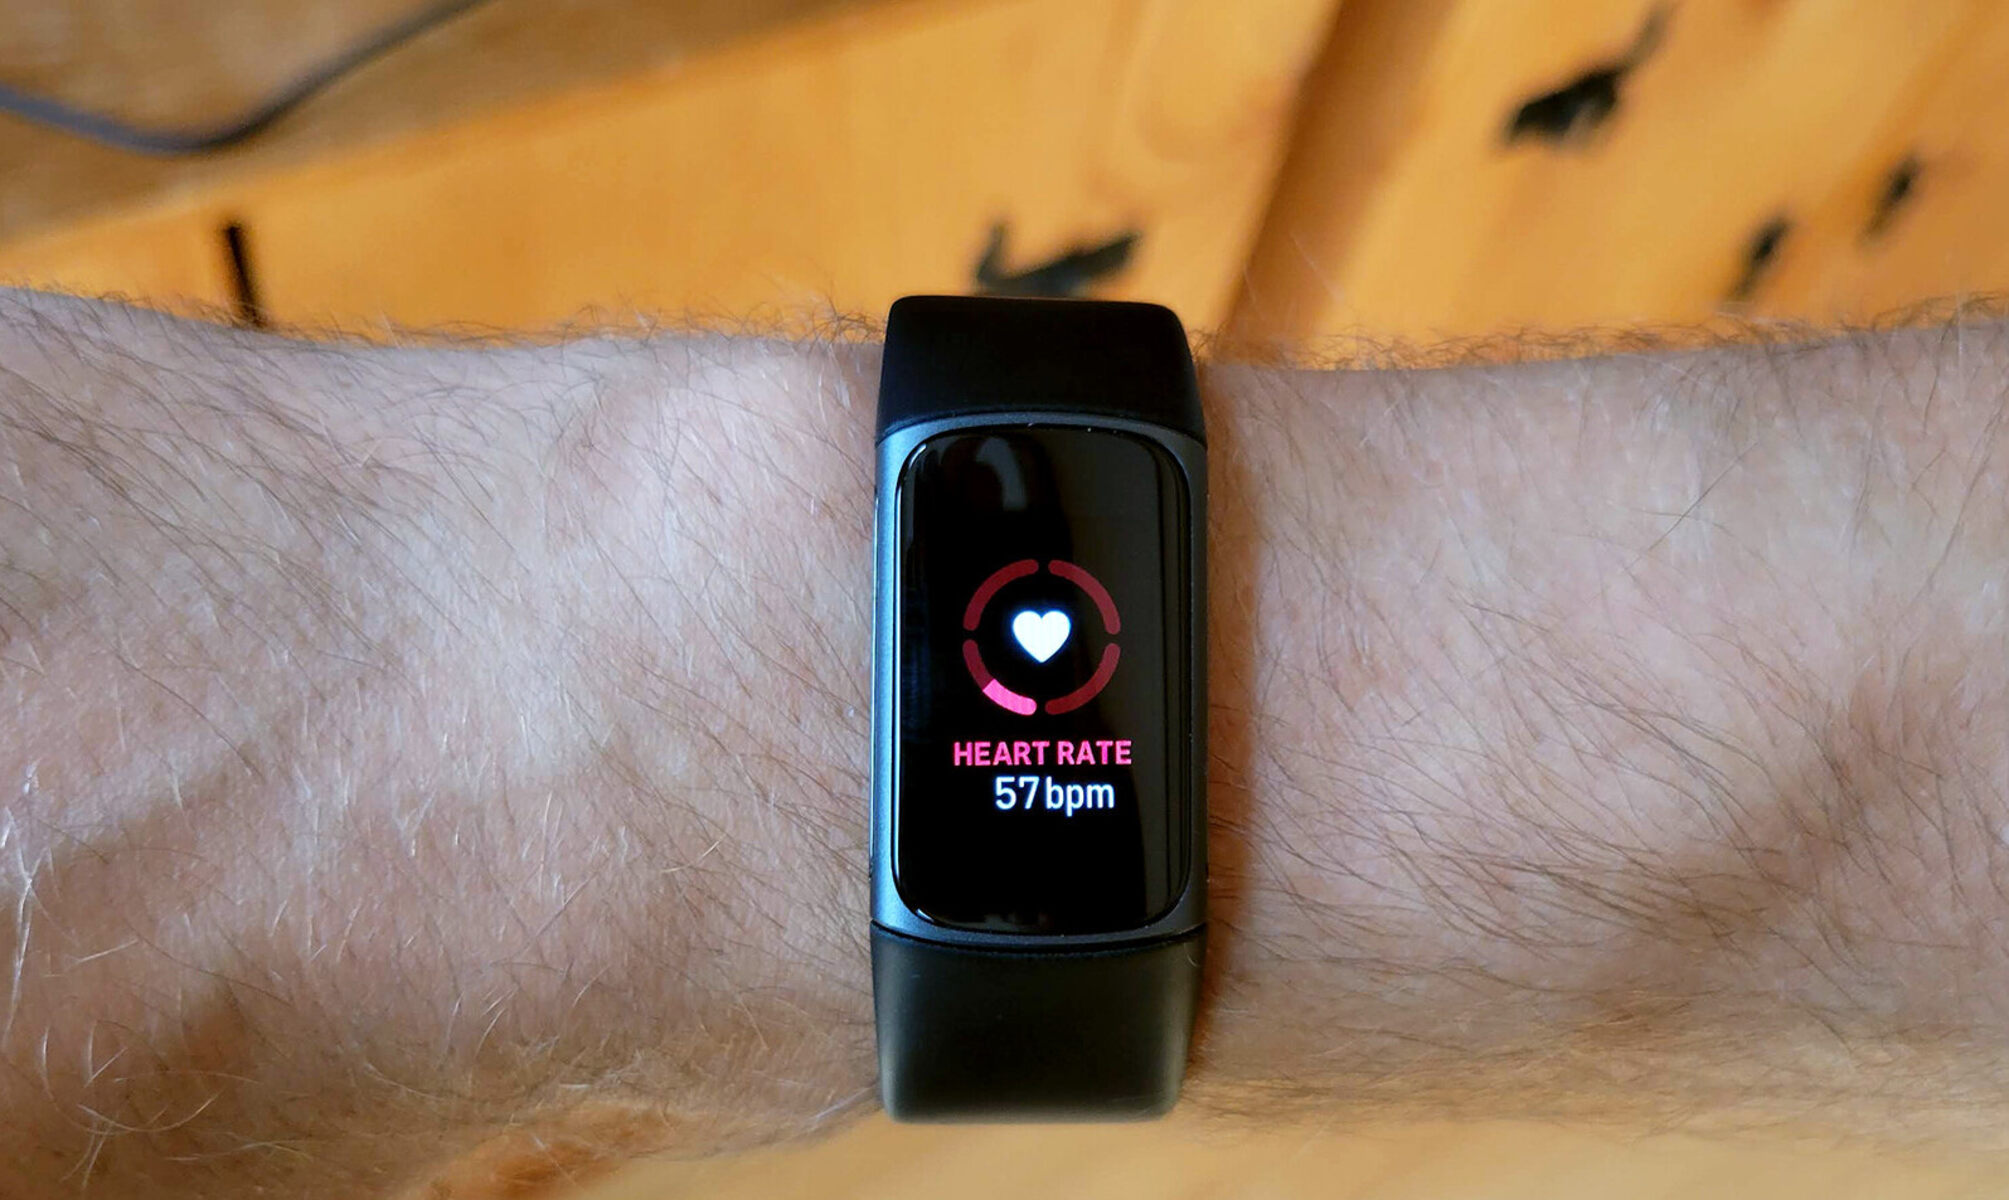 Heart Rate Woes: Troubleshooting Why Your Fitbit Isn’t Detecting Heart Rate